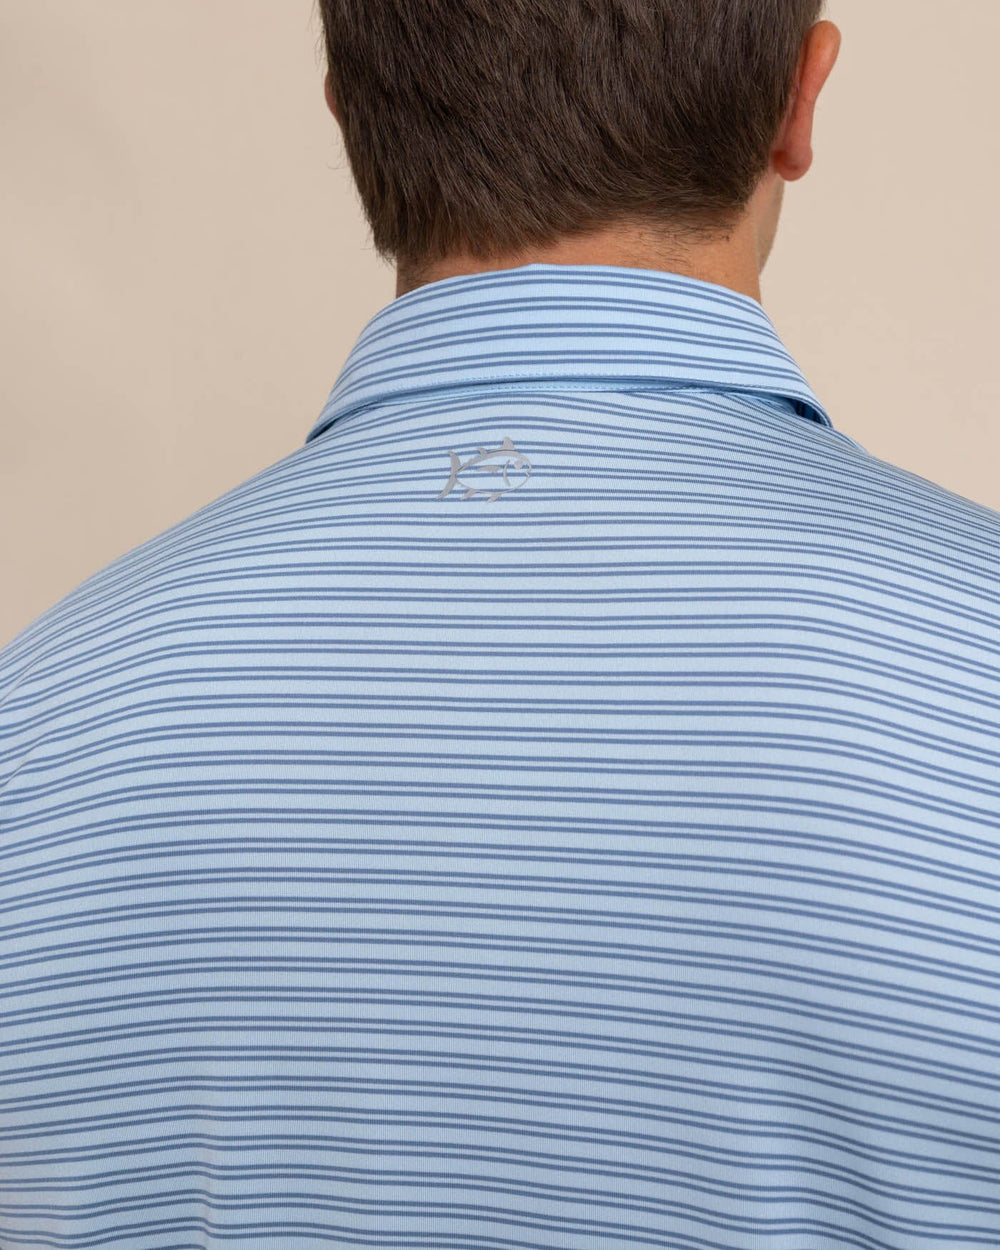 The detail view of the Southern Tide Driver Baywoods Stripe Polo by Southern Tide - Clearwater Blue